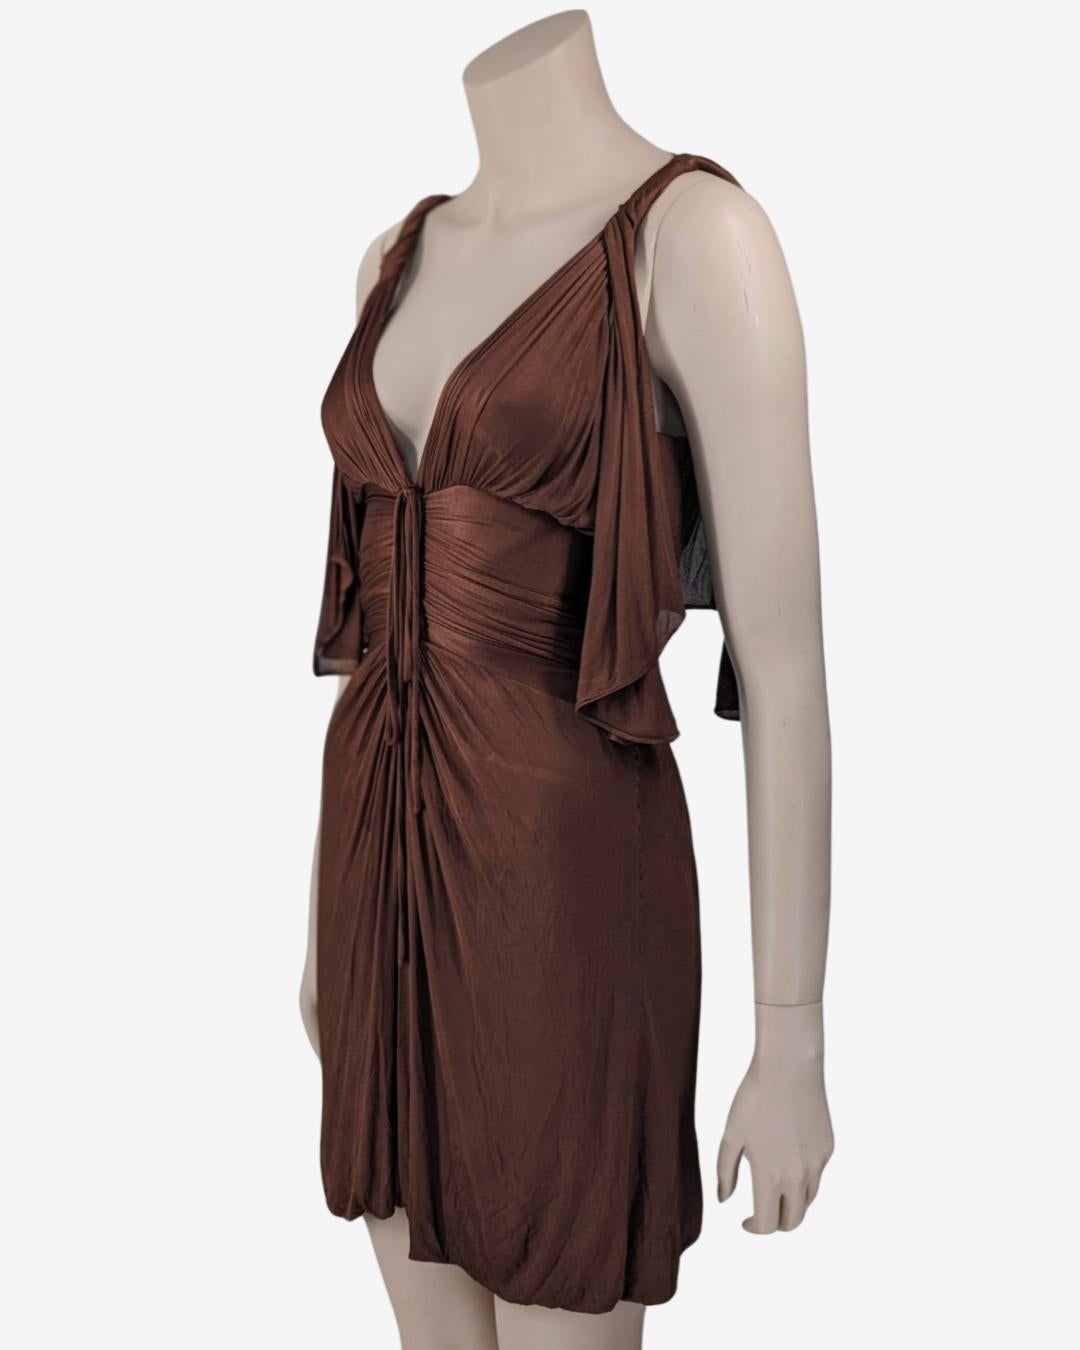 By Tom Ford iconic draped mini dress from the runway S/S 2003.

- Deep V neckline
- Light and soft fabric
- Velvet spaghetti straps
- Mini dress
- Zip on the back
- Opened sleeves you can tied them around the arm

Fits XS, small S
 

Flat